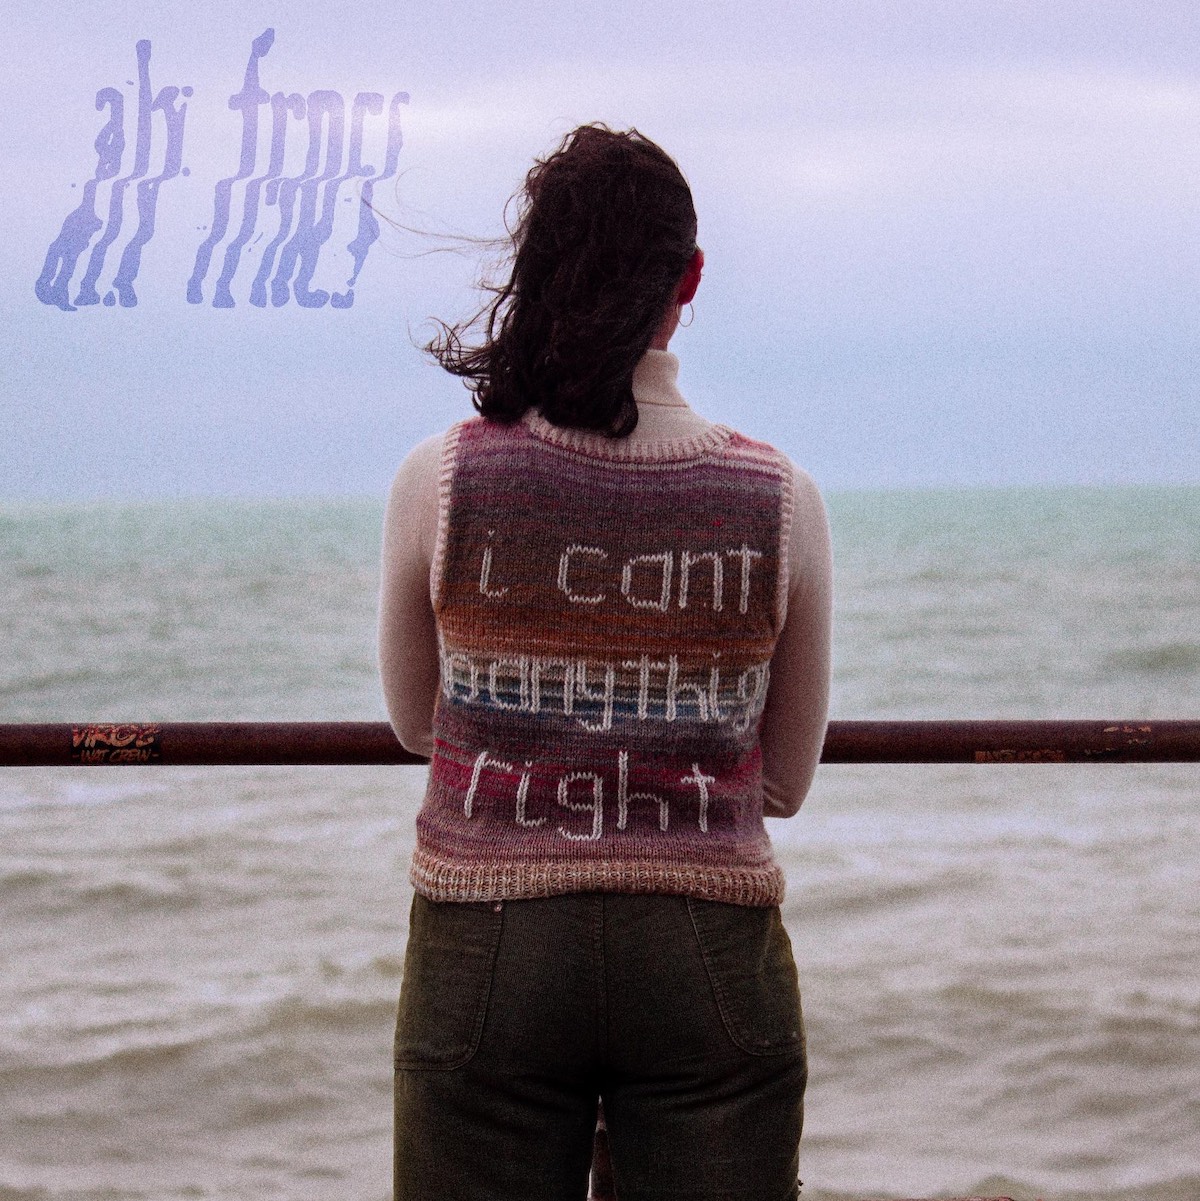 LISTEN: “i cant do anything right” by alx frncs